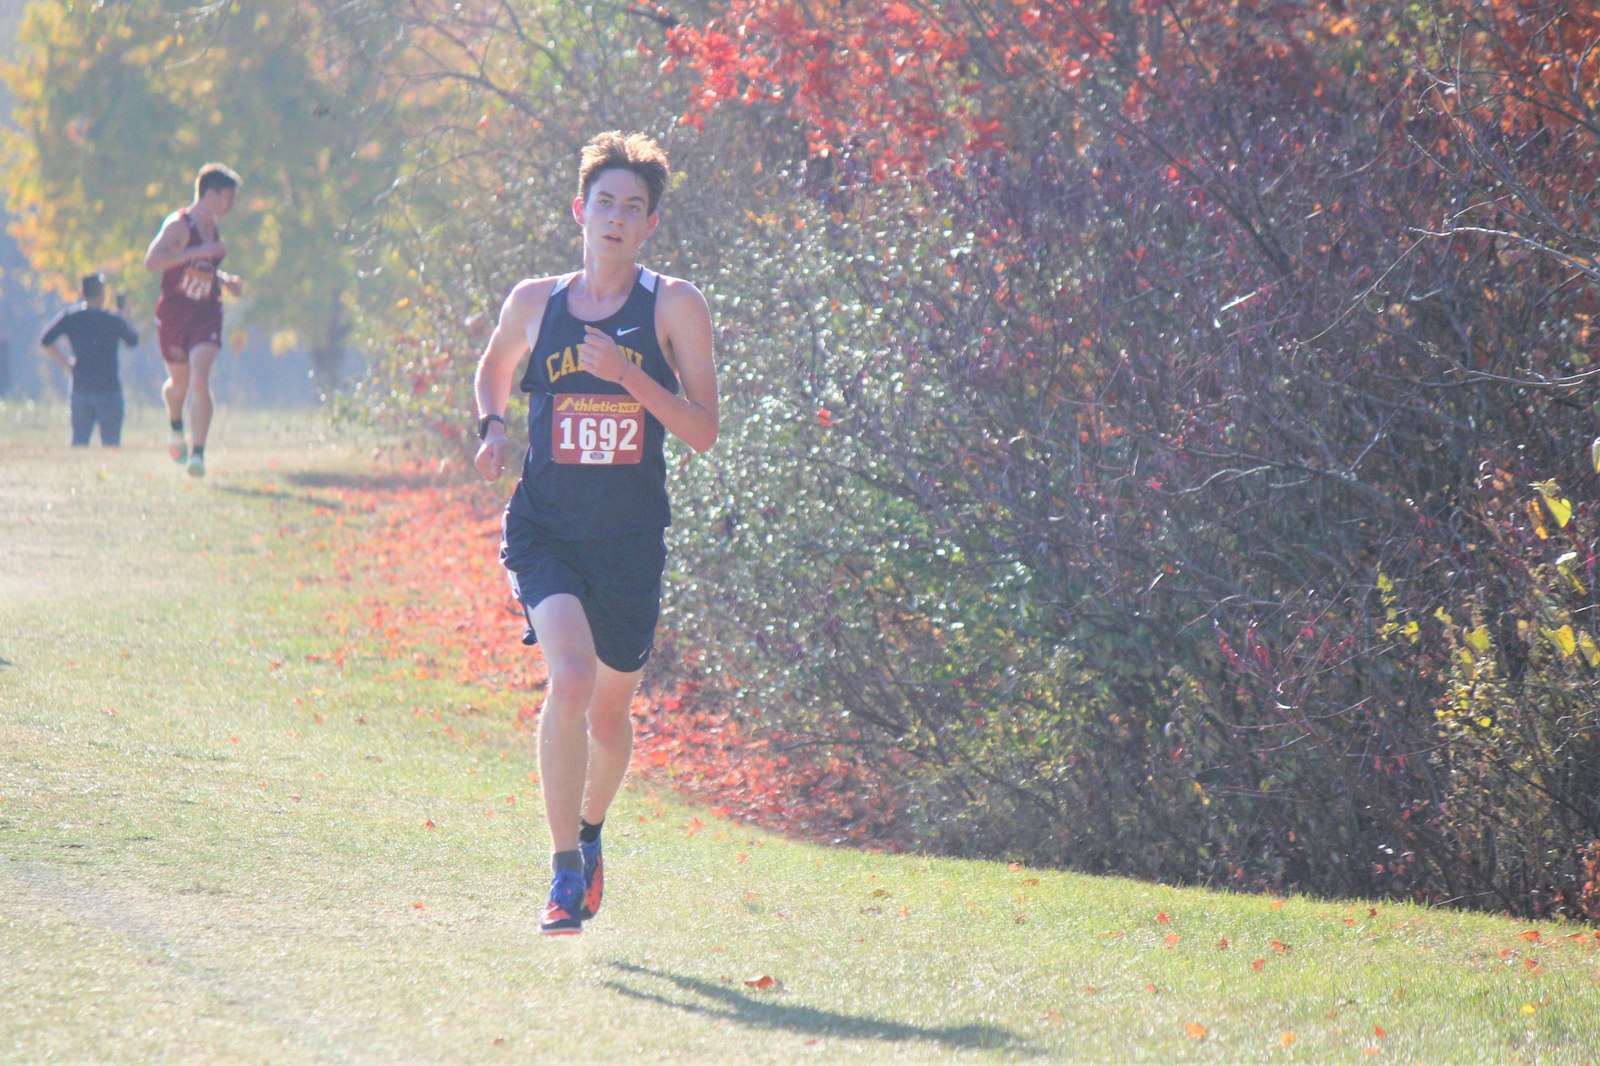 Allen Park Cabrini senior Christopher Russelberg won the Cardinal Division individual championship going away, covering five kilometers in 16:31.6.